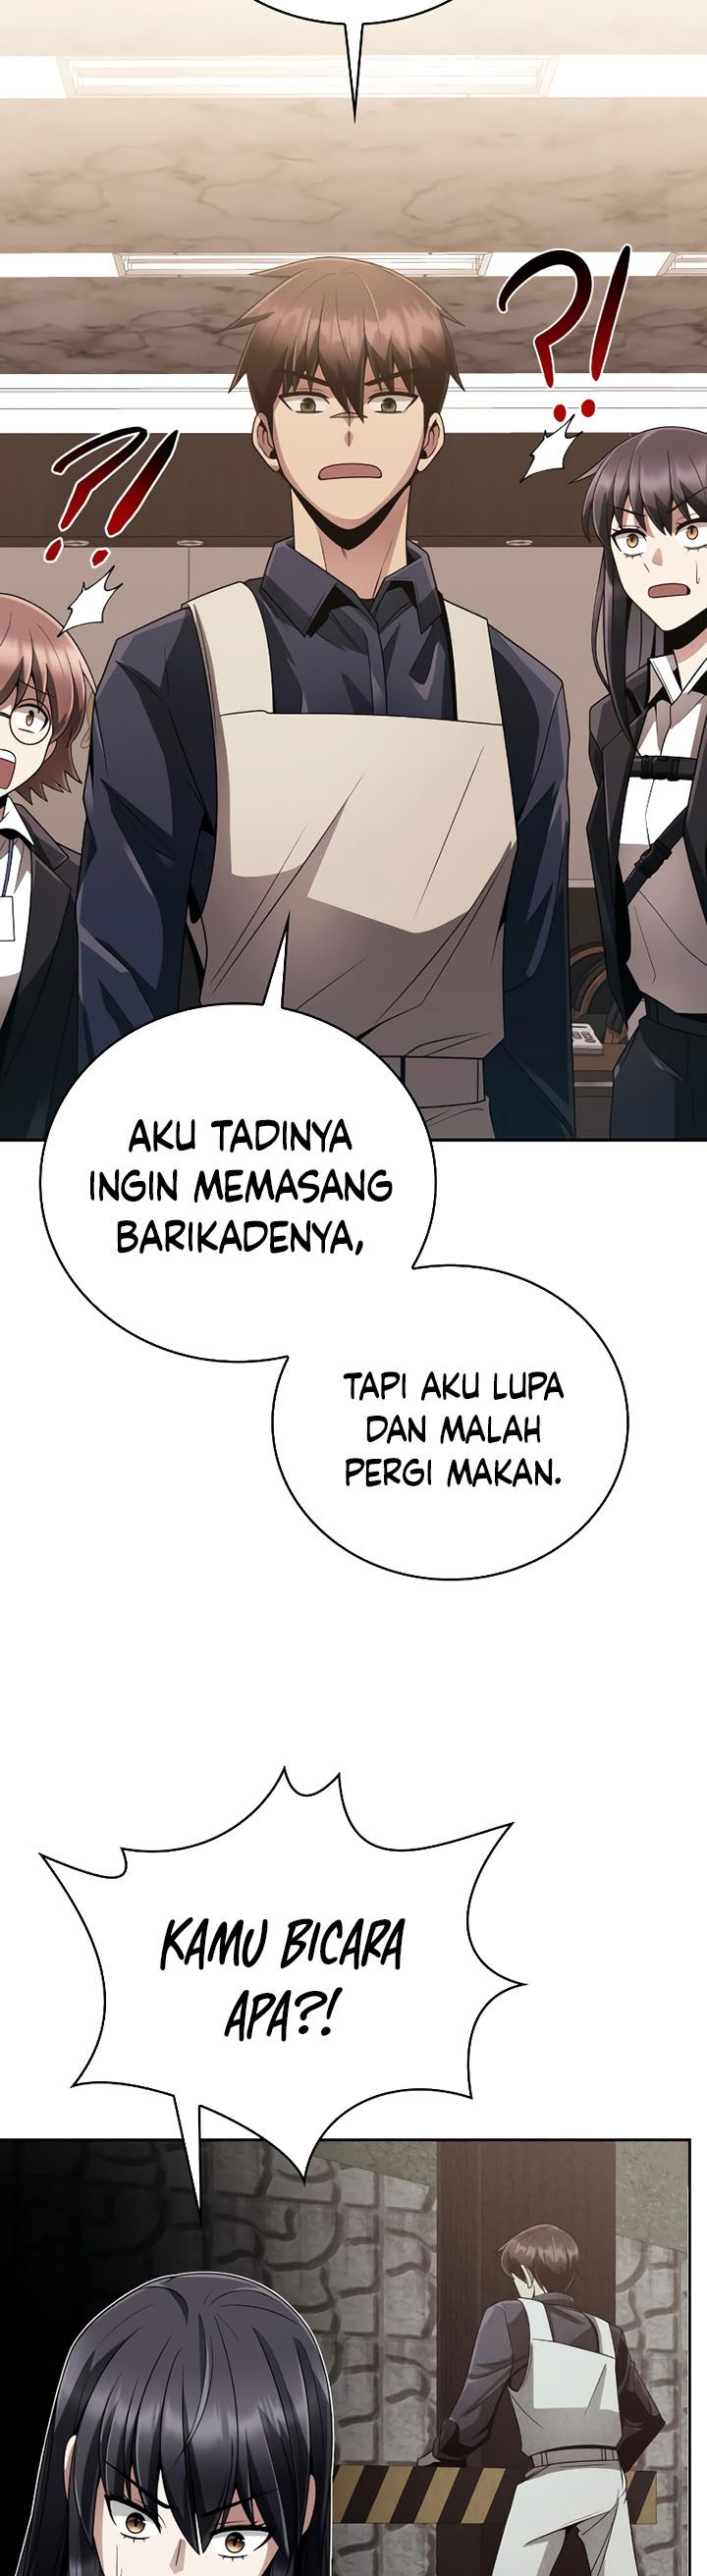 Dilarang COPAS - situs resmi www.mangacanblog.com - Komik clever cleaning life of the returned genius hunter 019 - chapter 19 20 Indonesia clever cleaning life of the returned genius hunter 019 - chapter 19 Terbaru 32|Baca Manga Komik Indonesia|Mangacan